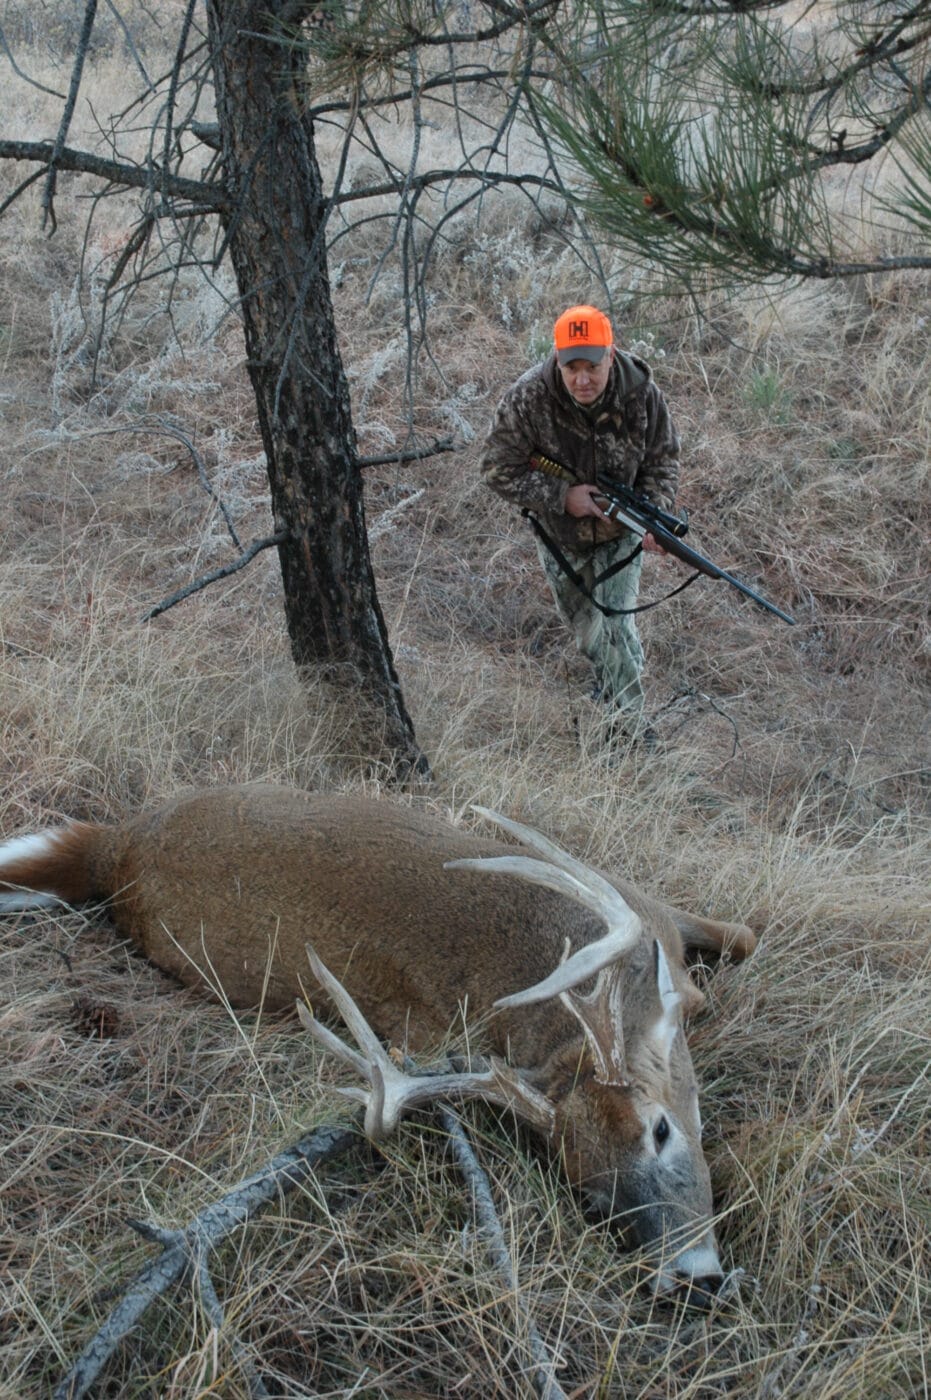 Hornady's Dave Emary hunting deer